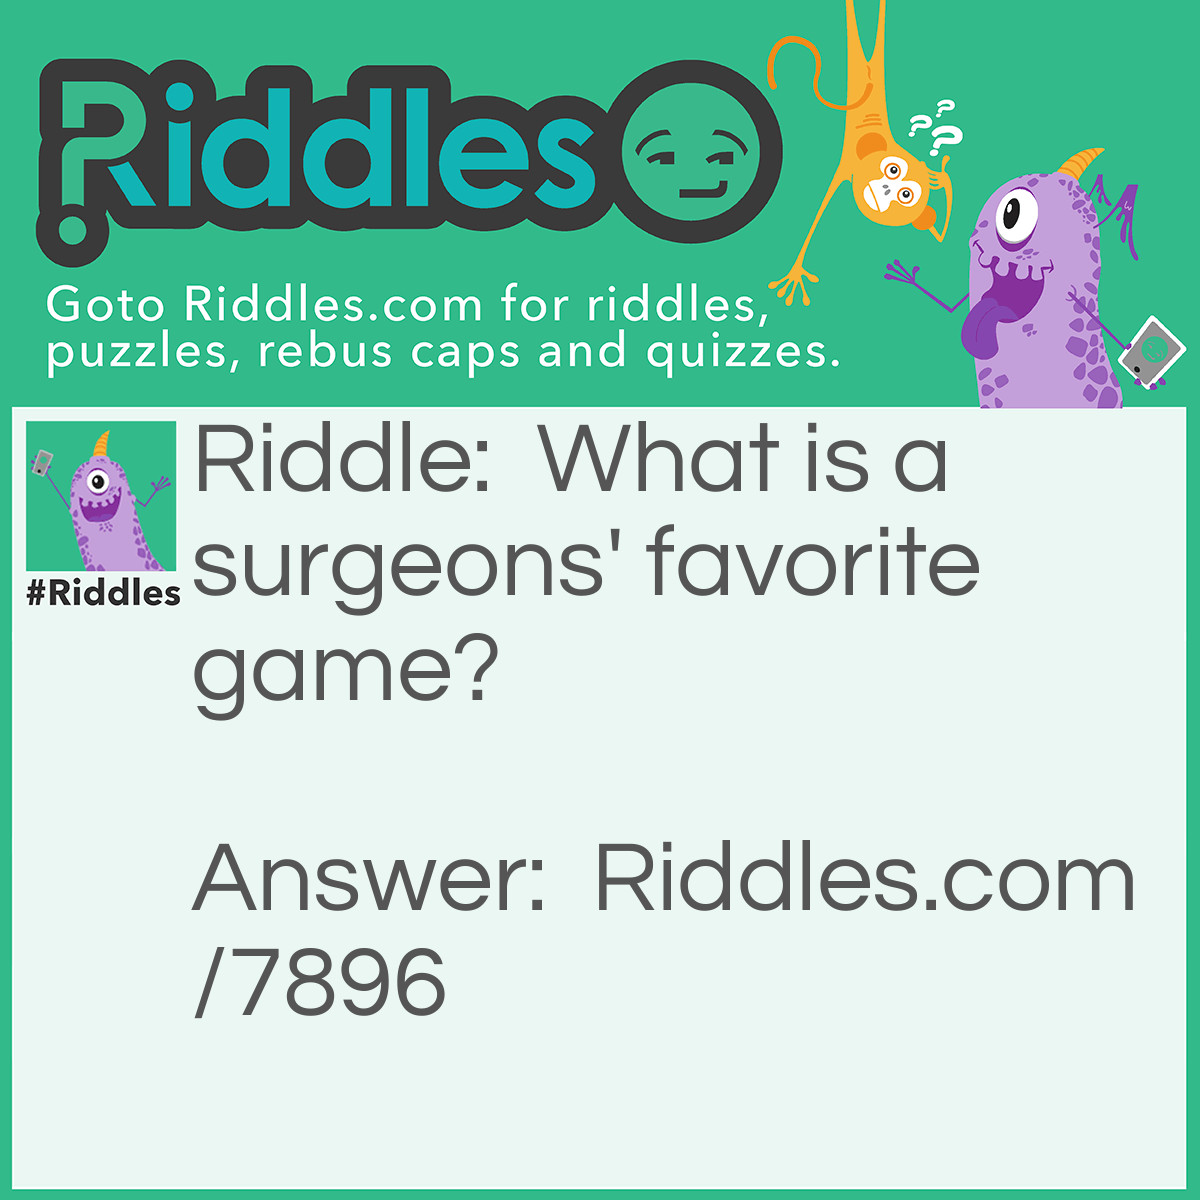 Riddle: What is a surgeons' favorite game? Answer: Operation.